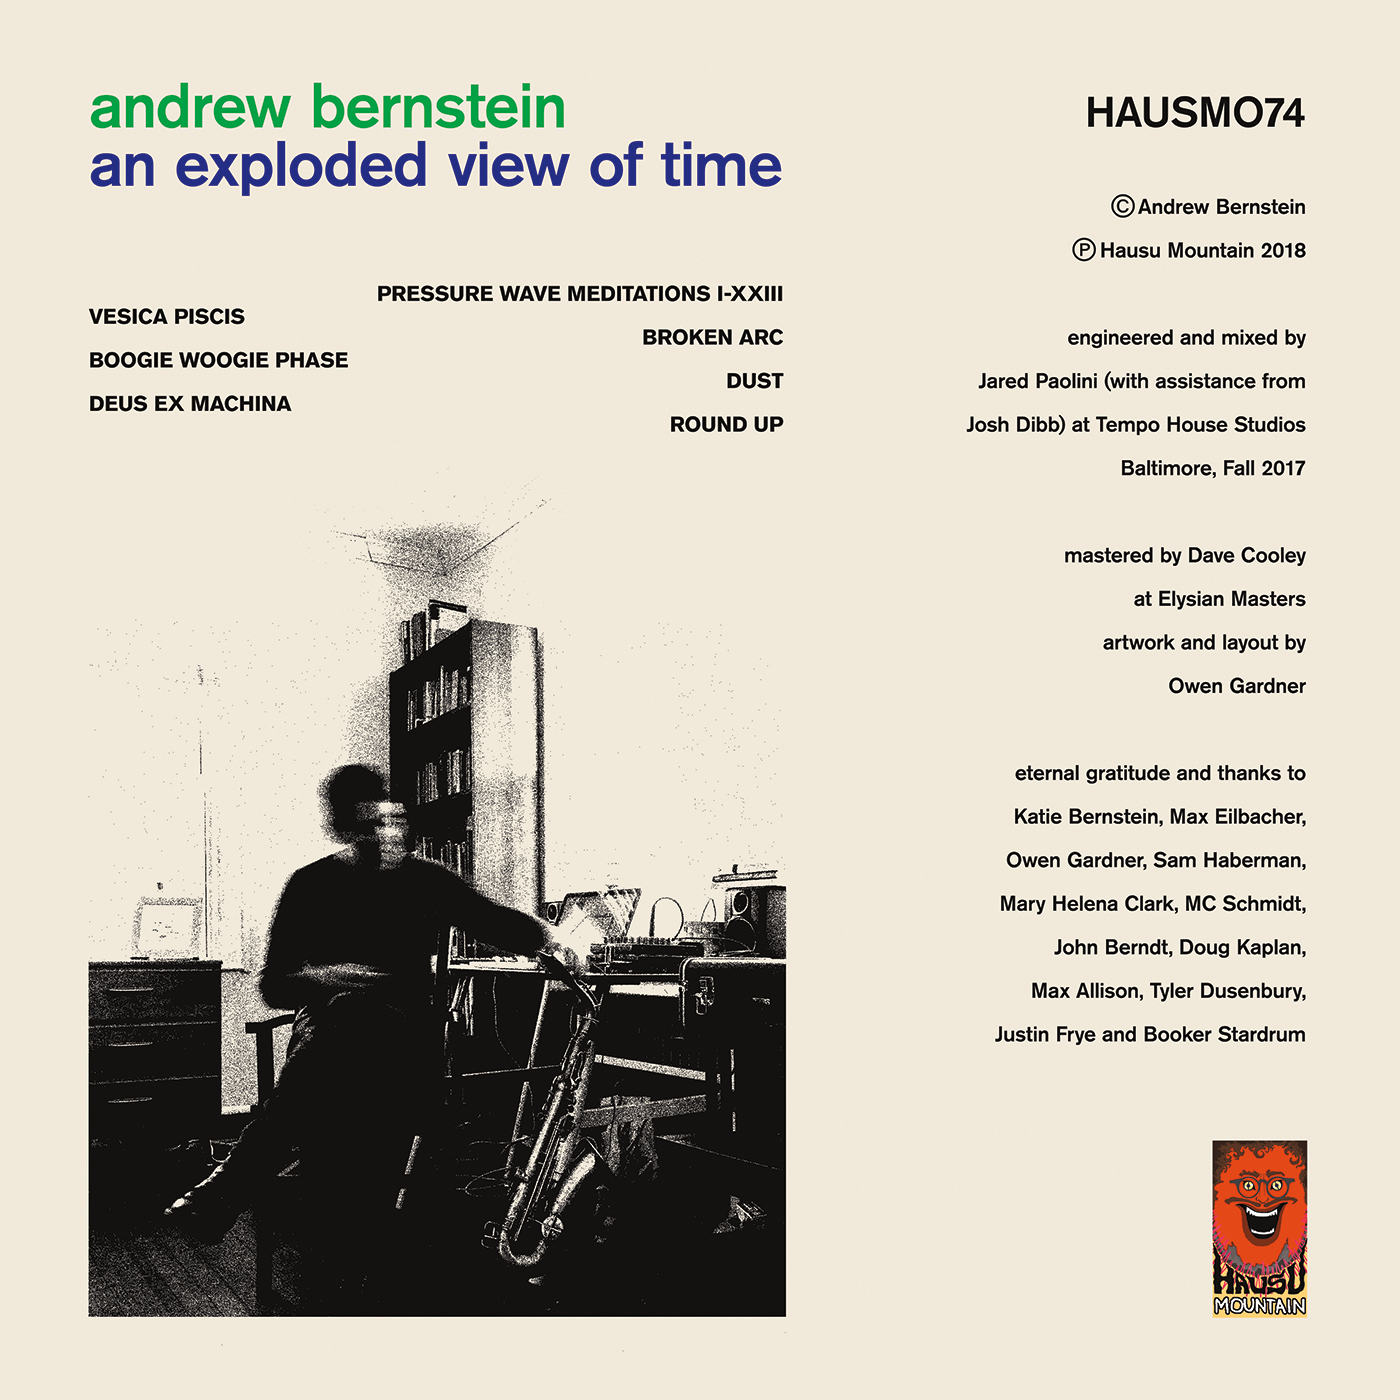 HAUSMO74 - Andrew Bernstein - An Expoded View of Time - BACK